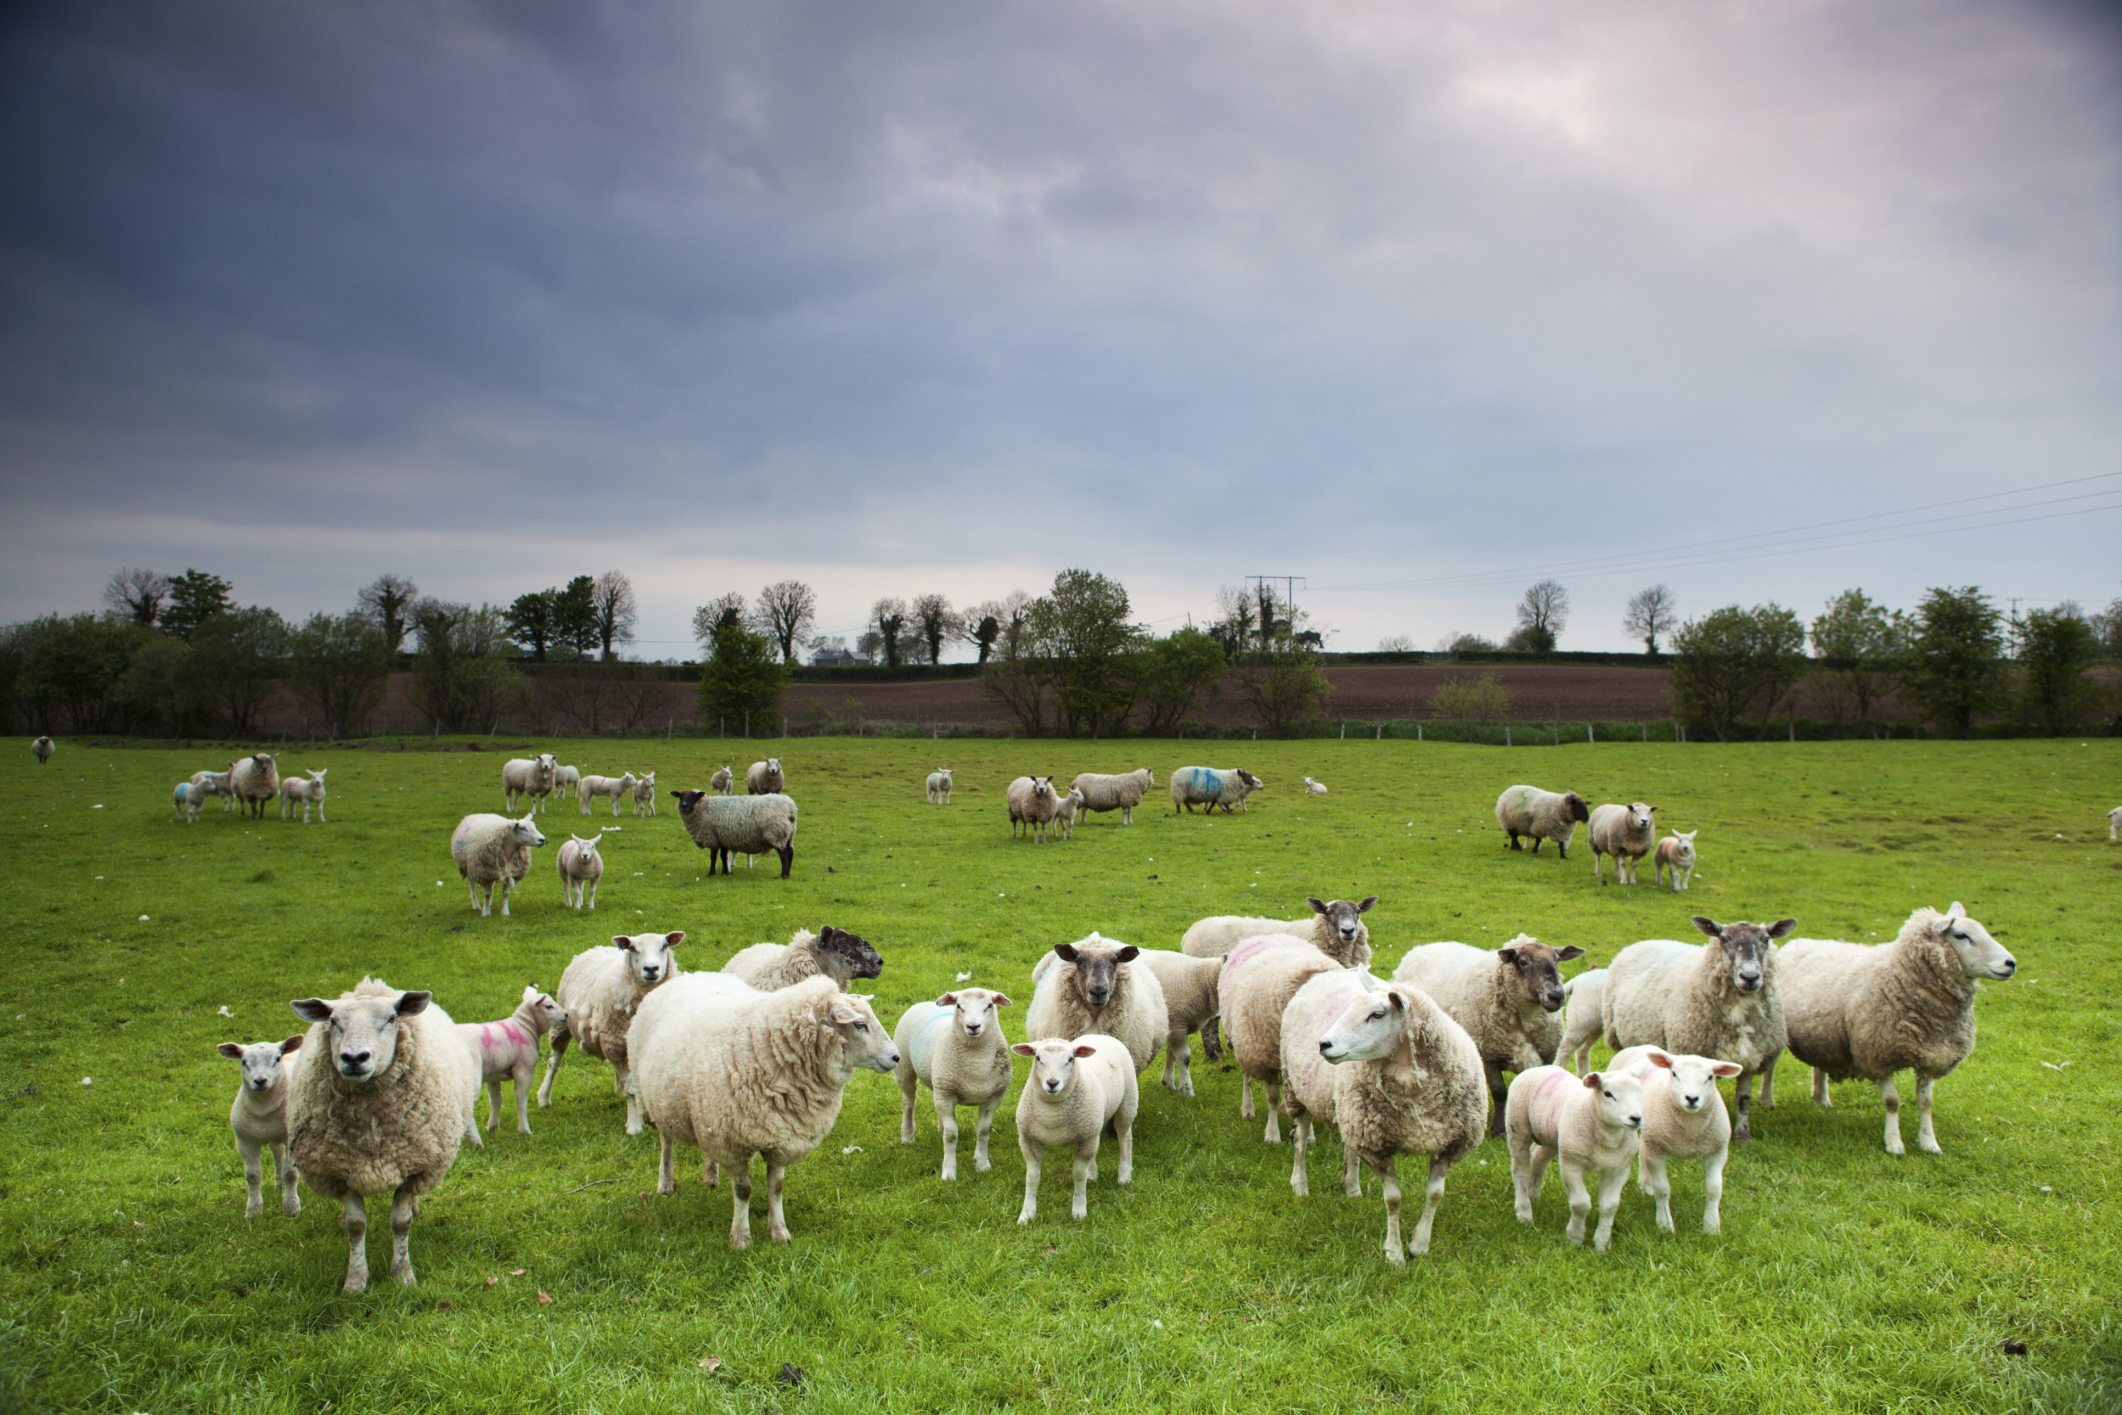 The sheep sector plays a vital role in boosting the economies of rural areas